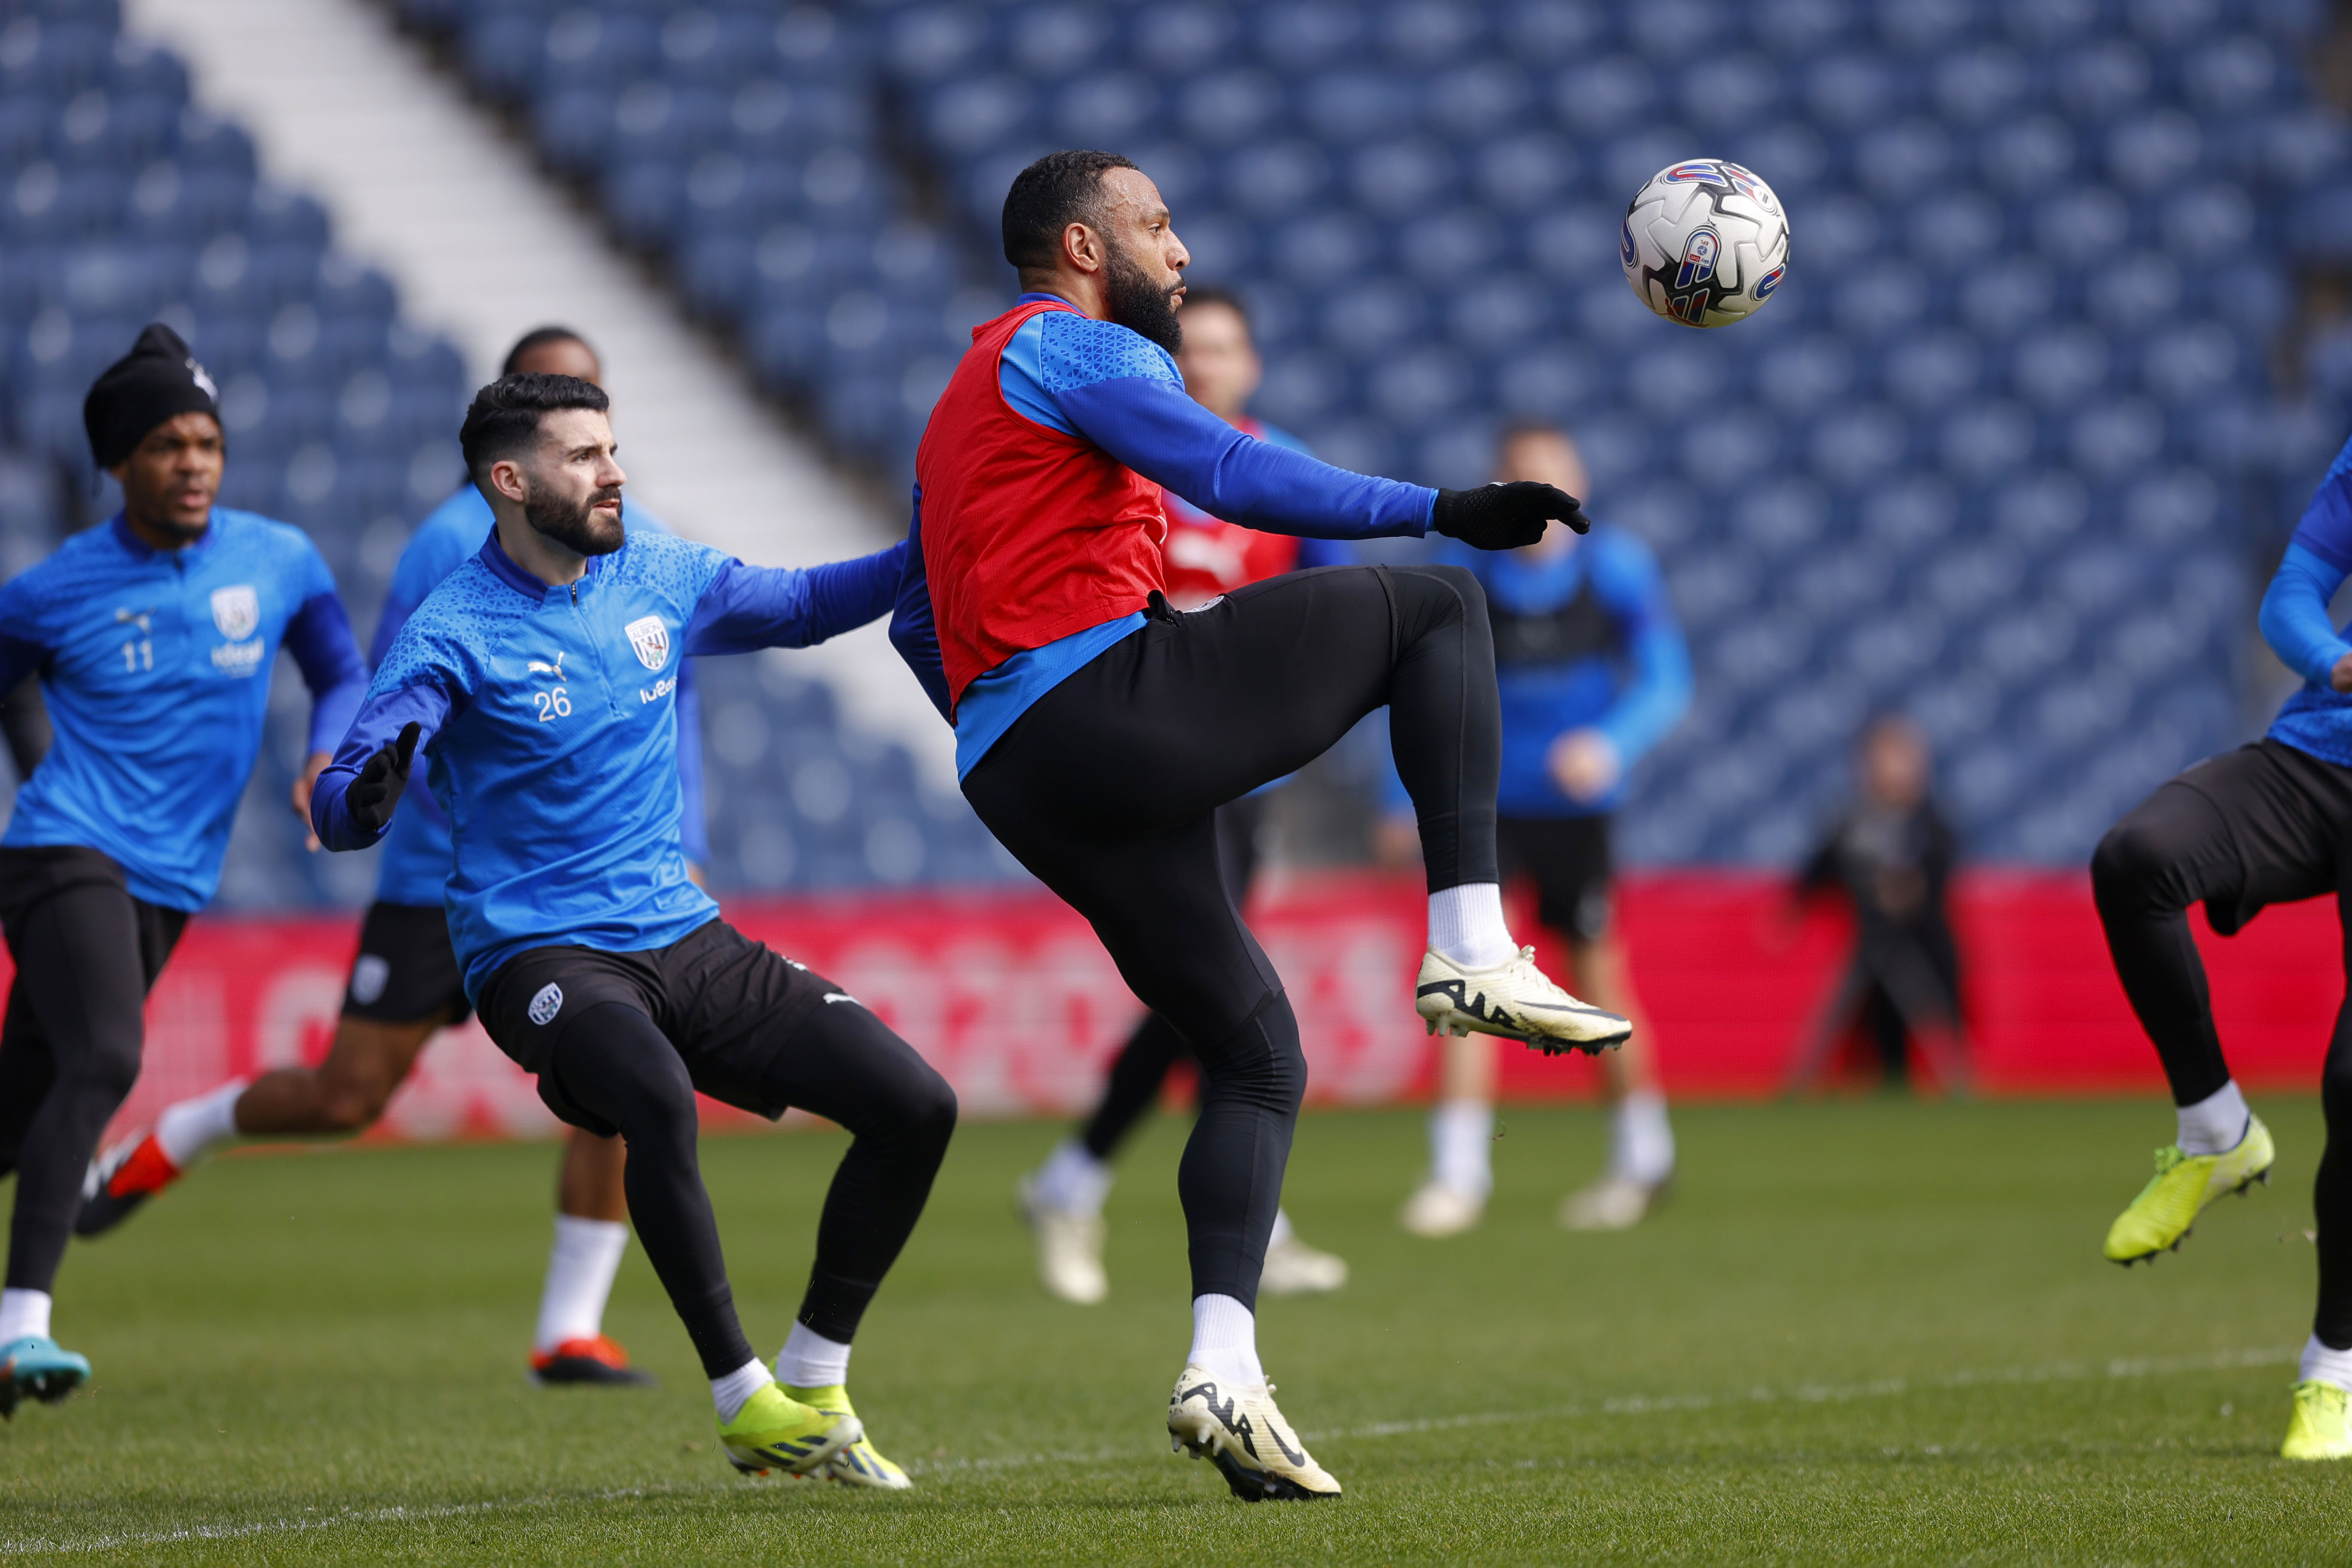 Matty Phillips attempts to control the ball during a training session at The Hawthorns